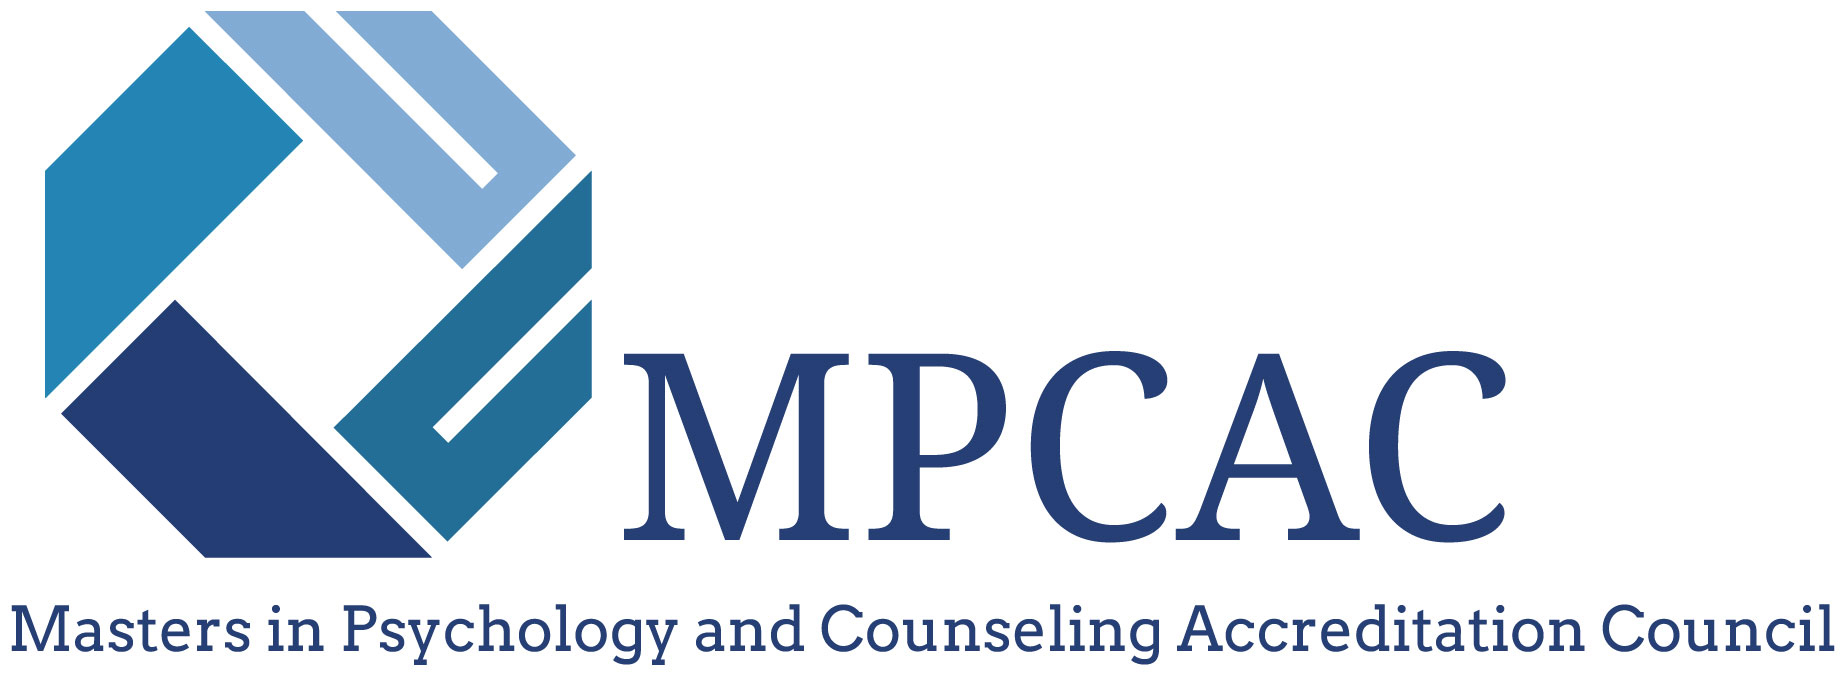 The Masters in Psychology and Counseling Accreditation Council Logo